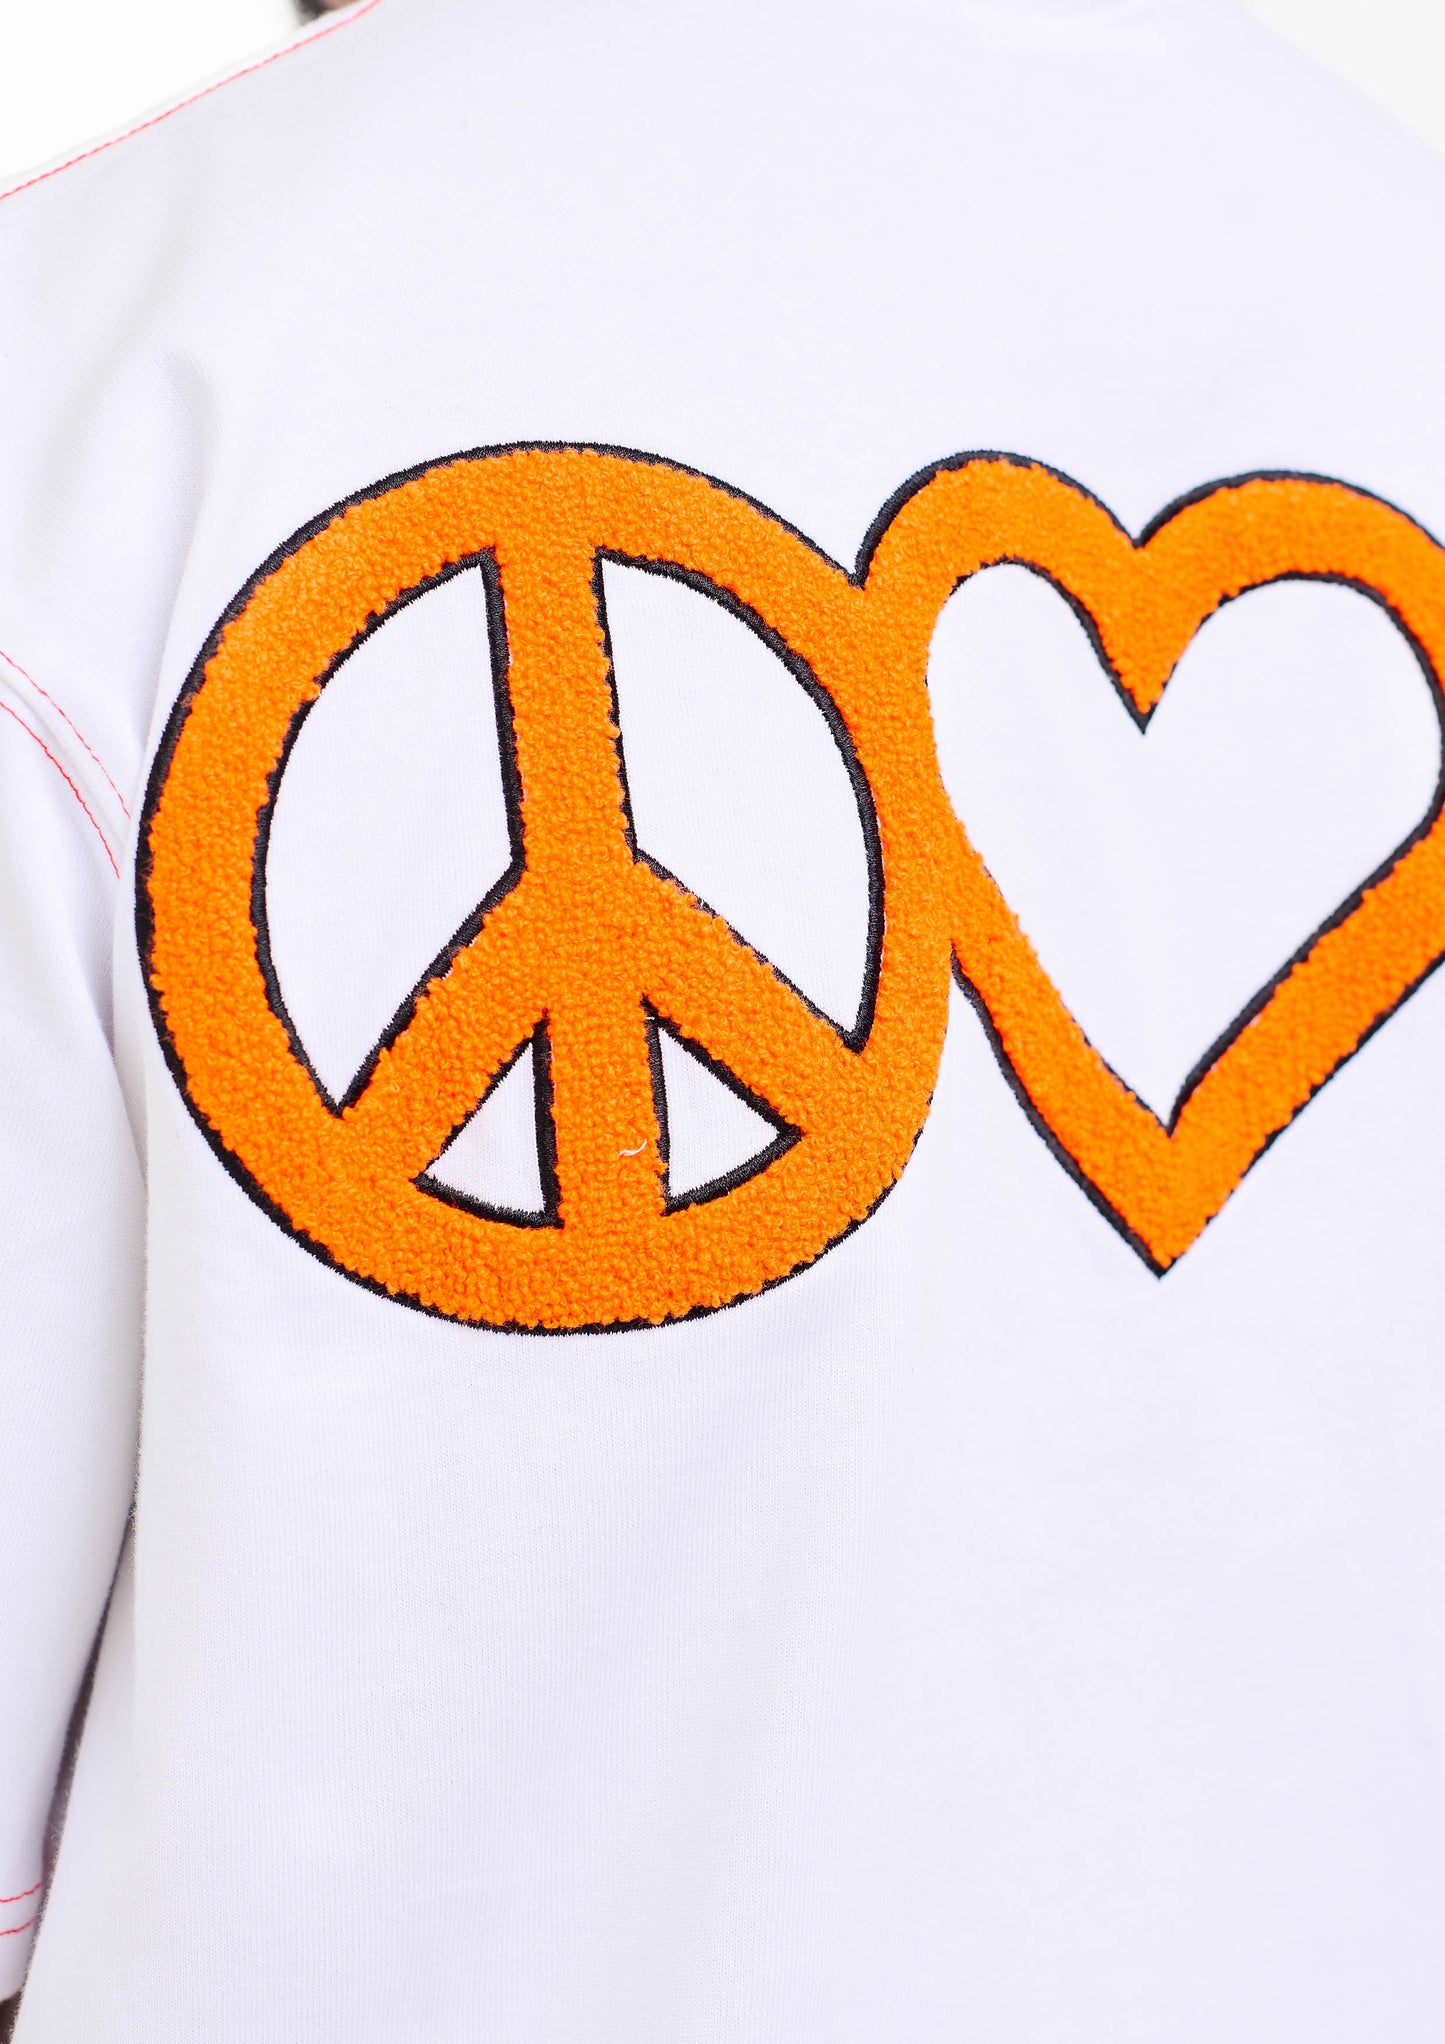 Peace, Love & Happiness T-shirt W